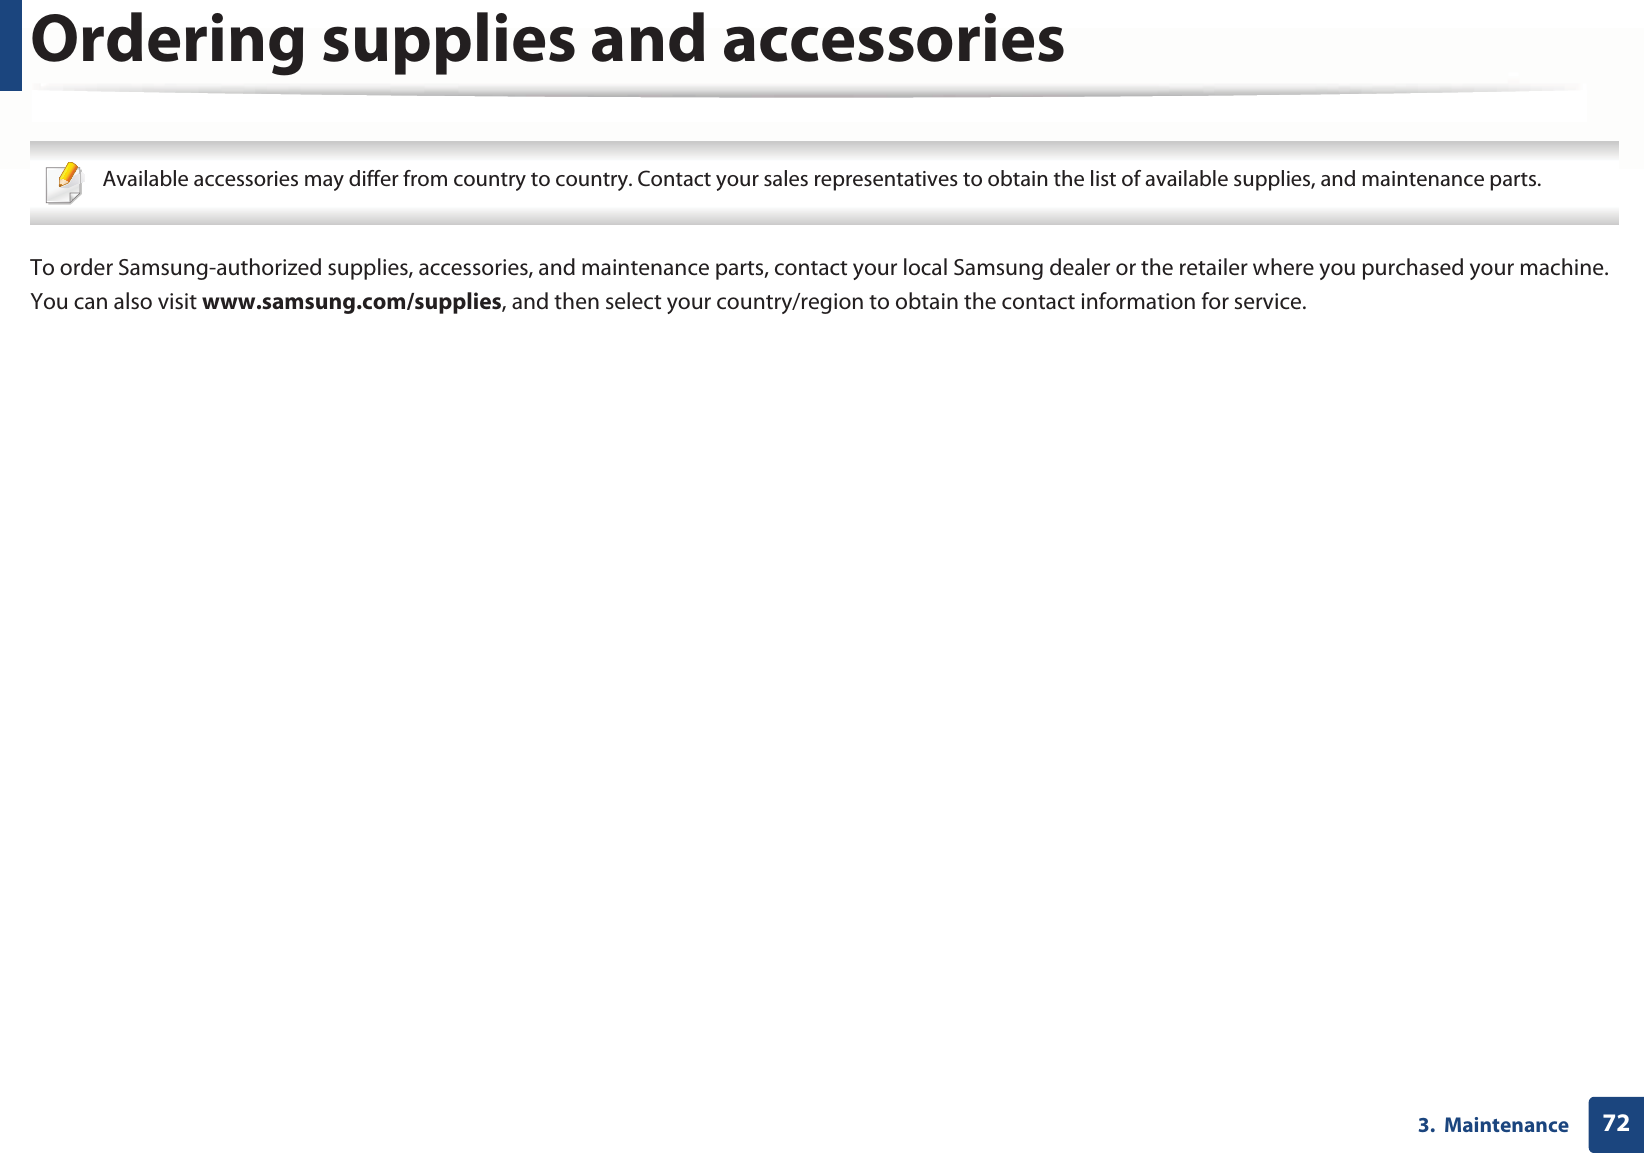 723.  MaintenanceOrdering supplies and accessories Available accessories may differ from country to country. Contact your sales representatives to obtain the list of available supplies, and maintenance parts. To order Samsung-authorized supplies, accessories, and maintenance parts, contact your local Samsung dealer or the retailer where you purchased your machine. You can also visit www.samsung.com/supplies, and then select your country/region to obtain the contact information for service.